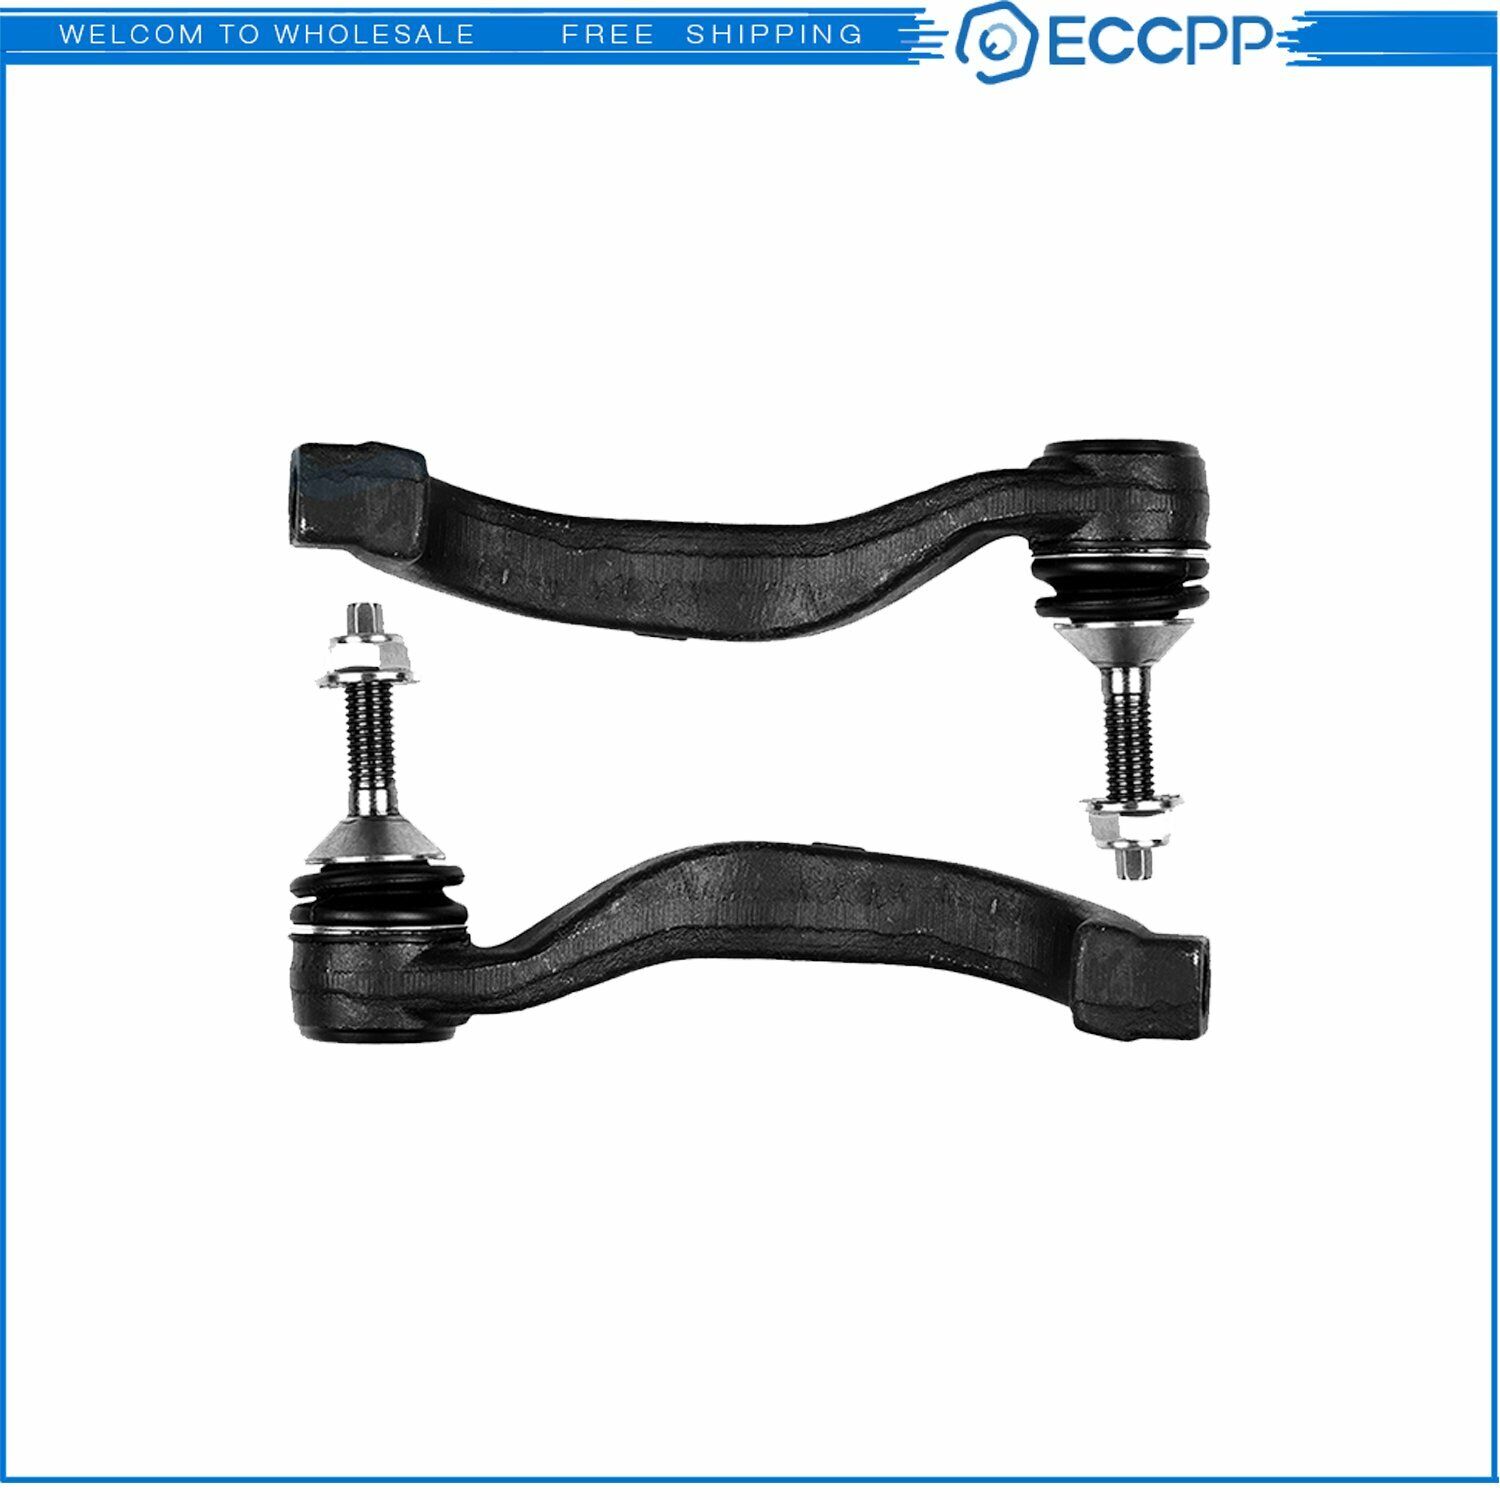 Outer Tie Rod Ends Kit x2 Fits 00-06 Lincoln LS T-Bird Jaguar S-Type Convertible